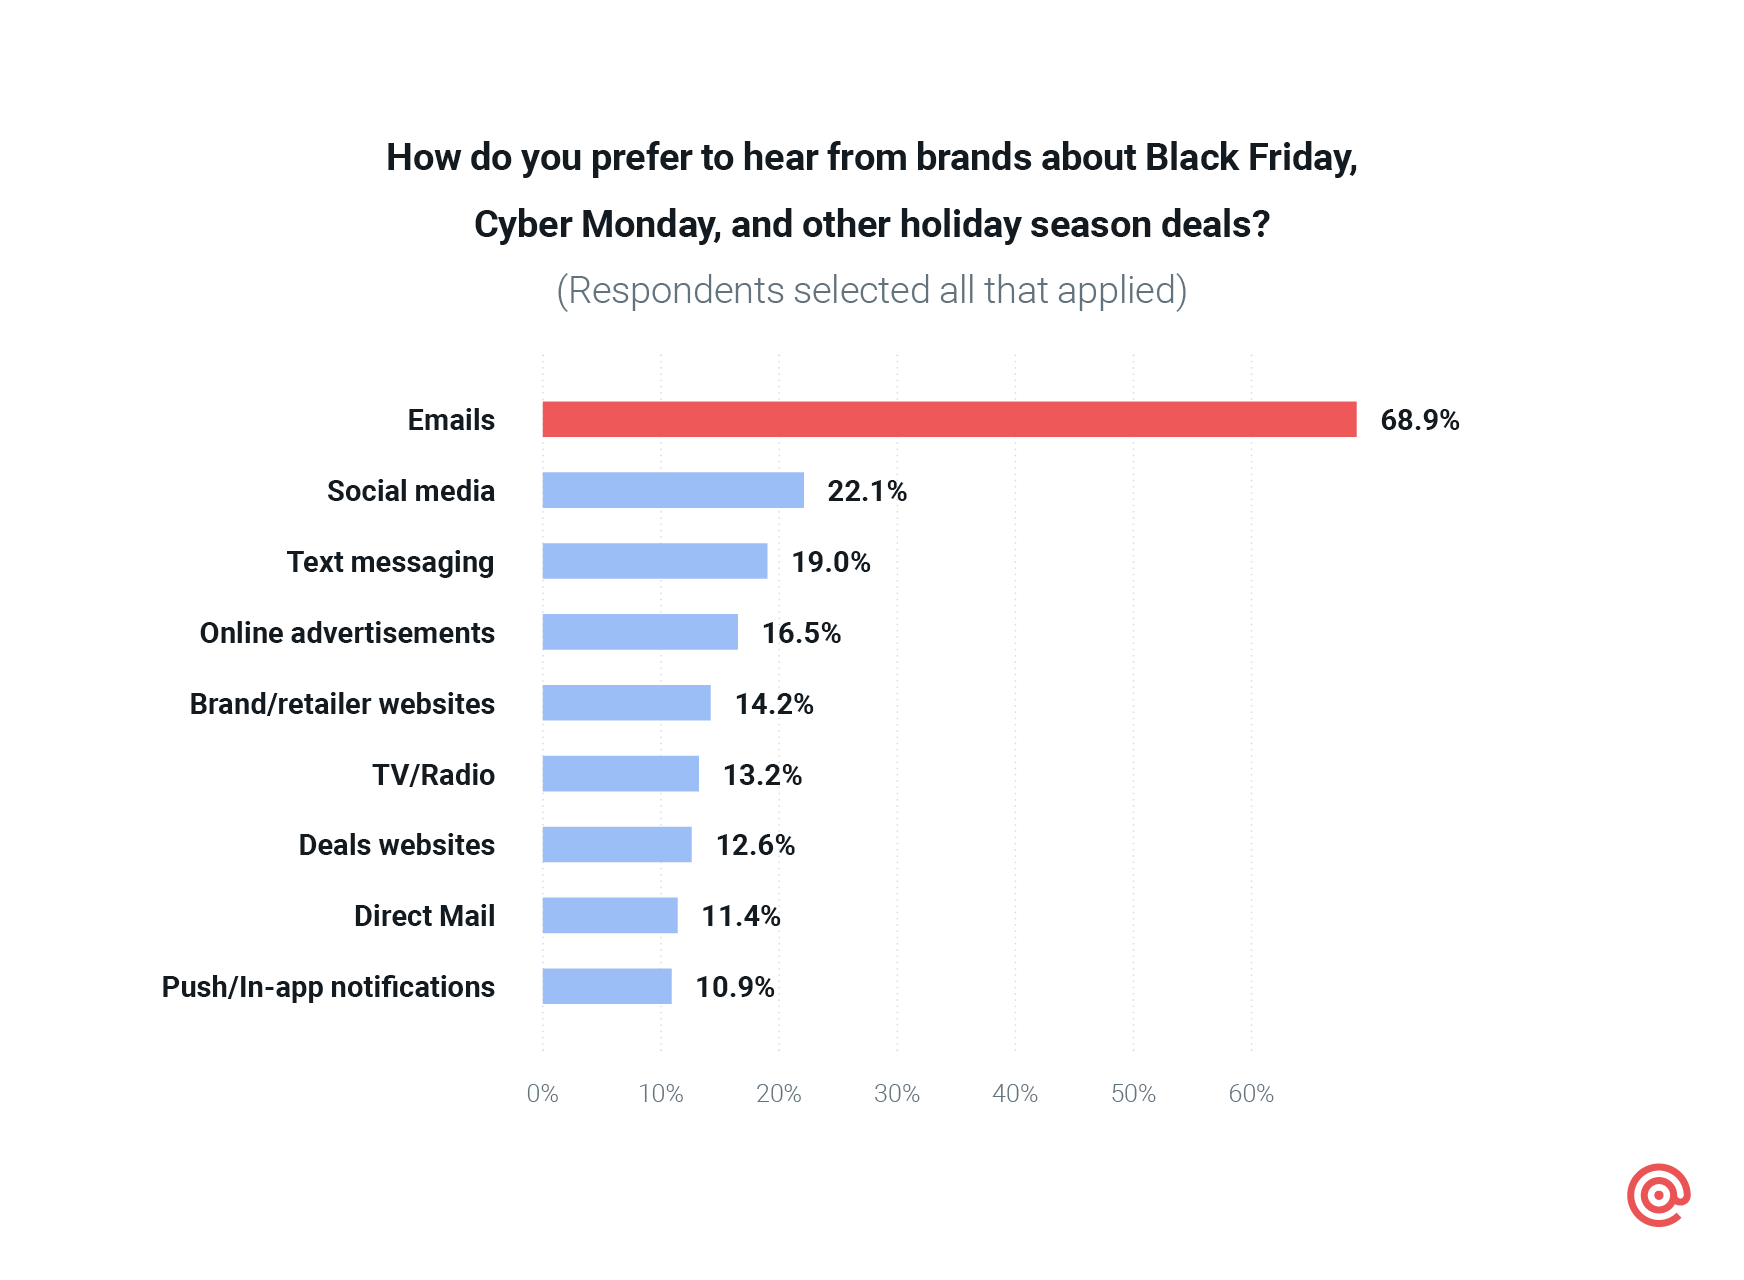 Graph from the recent Sinch Email survey on communication preferences and engagement during Black Friday, Cyber Monday, and other holiday season deals, with email showing a 68.9% preference among participants.